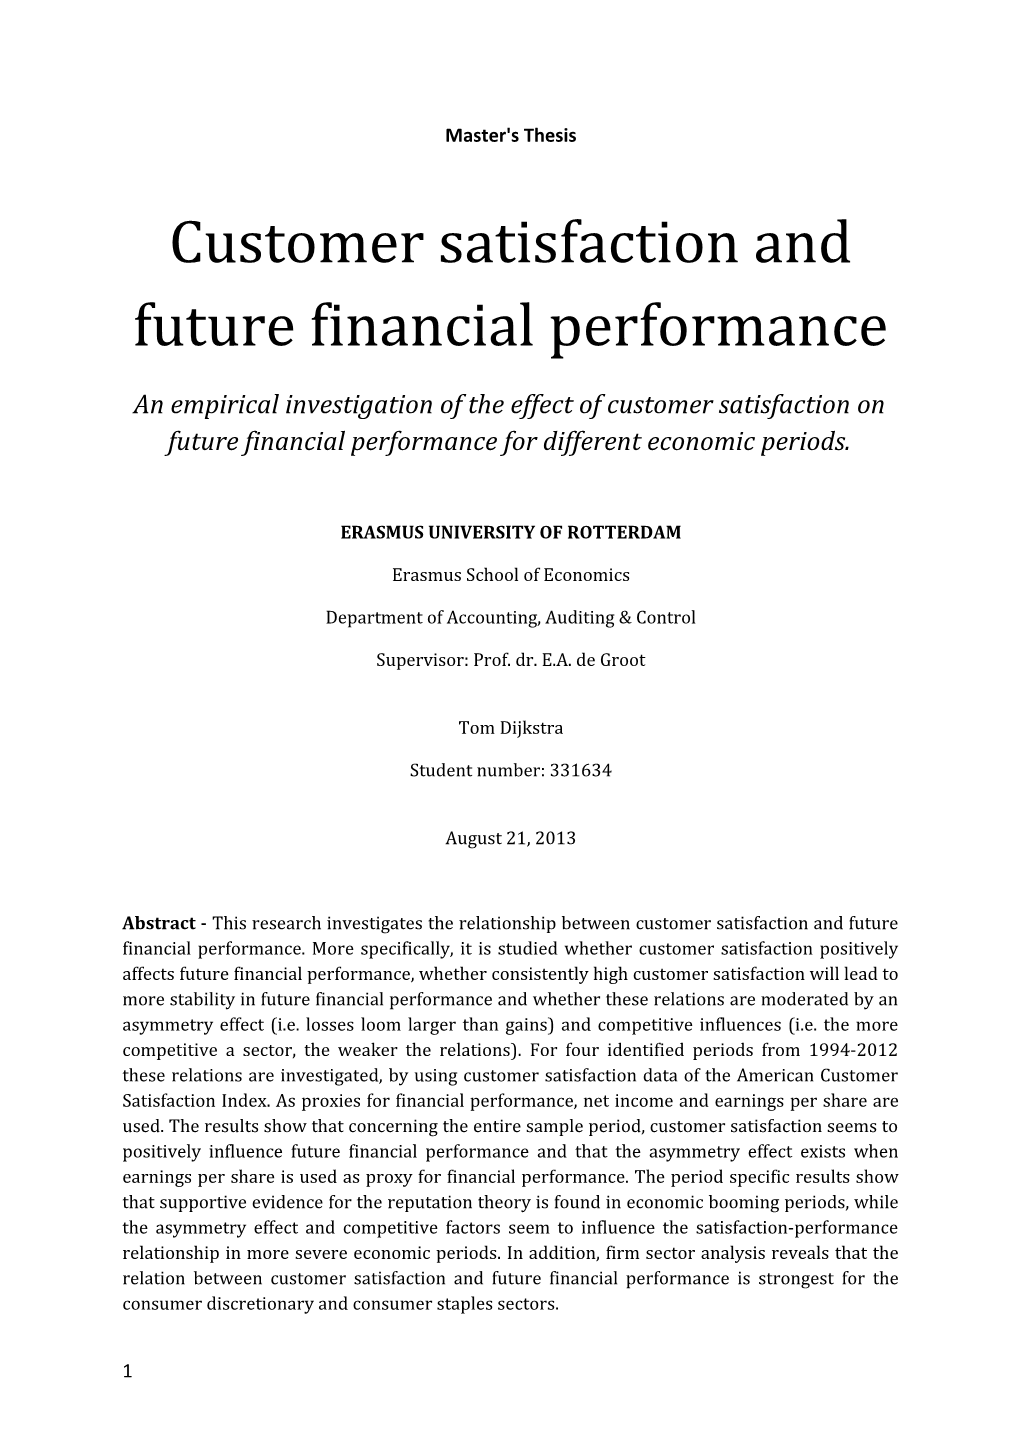 Customer Satisfaction and Future Financial Performance